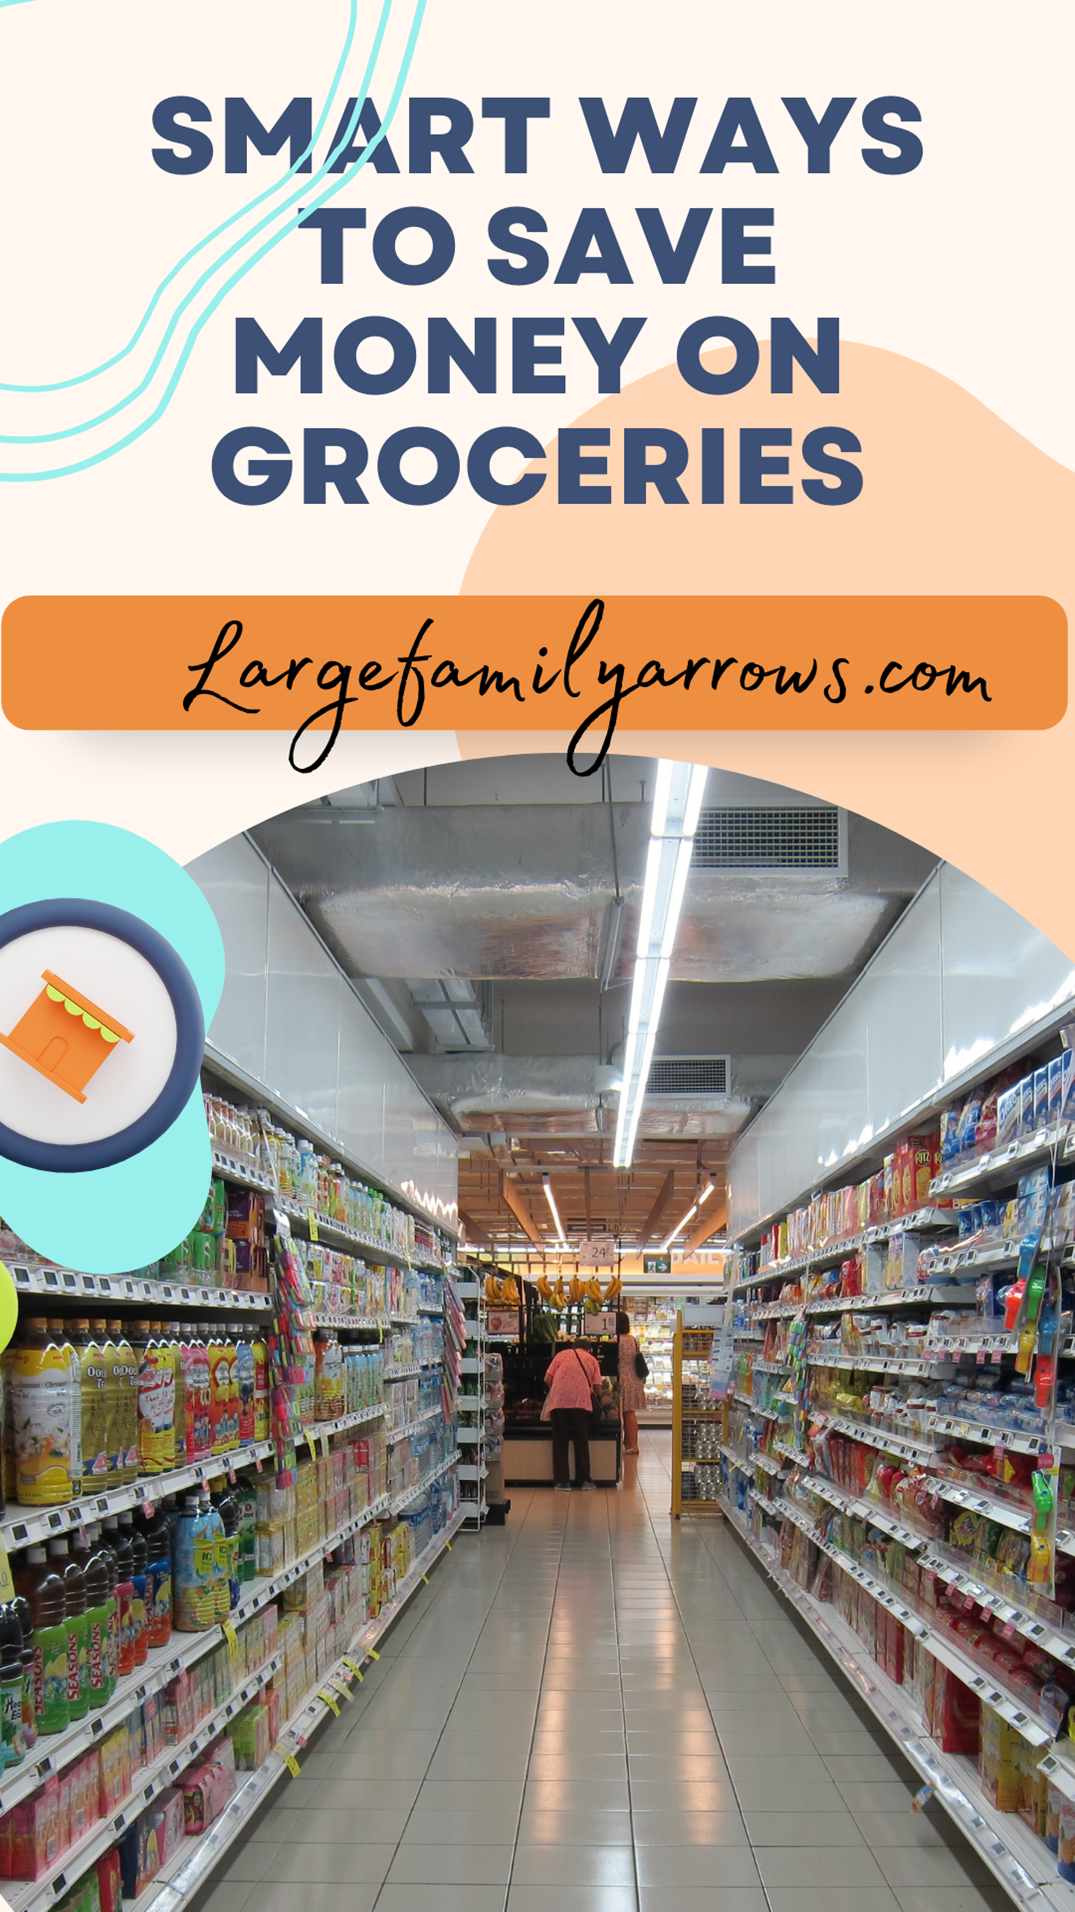 Smart Ways to Save Money on Groceries